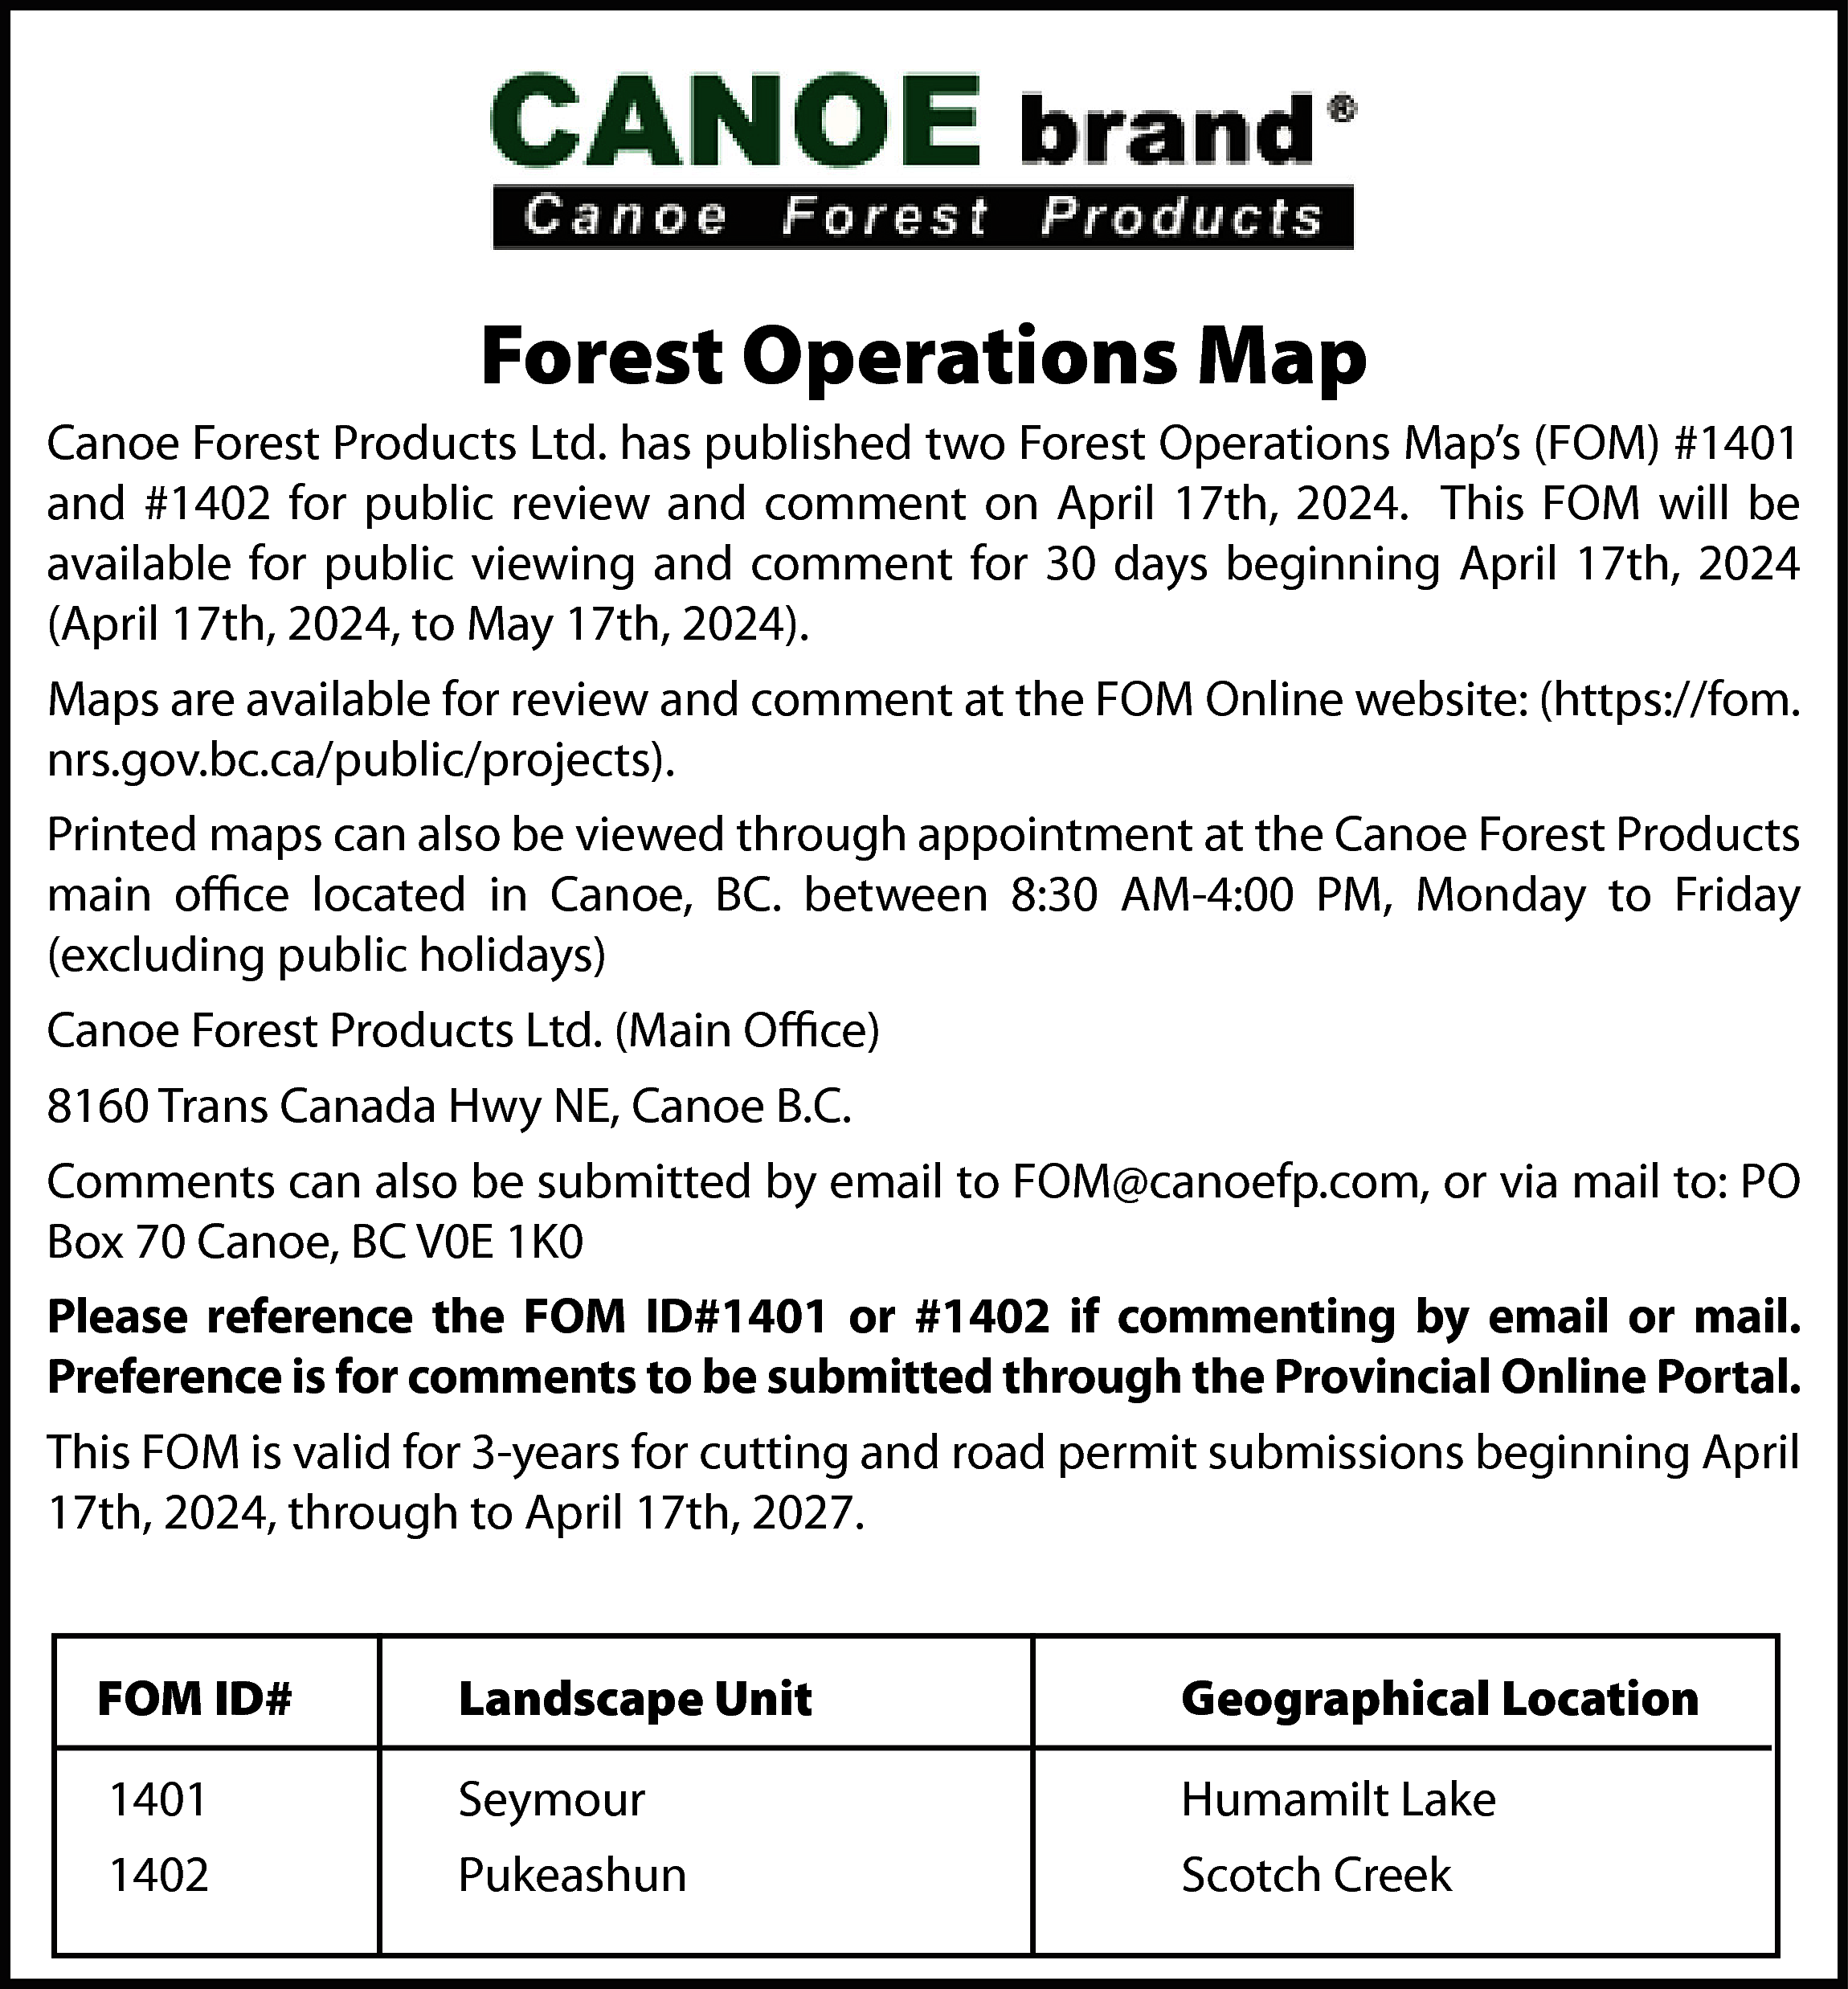 Forest Operations Map <br>Canoe Forest  Forest Operations Map  Canoe Forest Products Ltd. has published two Forest Operations Map’s (FOM) #1401  and #1402 for public review and comment on April 17th, 2024. This FOM will be  available for public viewing and comment for 30 days beginning April 17th, 2024  (April 17th, 2024, to May 17th, 2024).  Maps are available for review and comment at the FOM Online website: (https://fom.  nrs.gov.bc.ca/public/projects).  Printed maps can also be viewed through appointment at the Canoe Forest Products  main office located in Canoe, BC. between 8:30 AM-4:00 PM, Monday to Friday  (excluding public holidays)  Canoe Forest Products Ltd. (Main Office)  8160 Trans Canada Hwy NE, Canoe B.C.  Comments can also be submitted by email to FOM@canoefp.com, or via mail to: PO  Box 70 Canoe, BC V0E 1K0  Please reference the FOM ID#1401 or #1402 if commenting by email or mail.  Preference is for comments to be submitted through the Provincial Online Portal.  This FOM is valid for 3-years for cutting and road permit submissions beginning April  17th, 2024, through to April 17th, 2027.  FOM ID#    Landscape Unit    Geographical Location    1401  1402    Seymour  Pukeashun    Humamilt Lake  Scotch Creek    